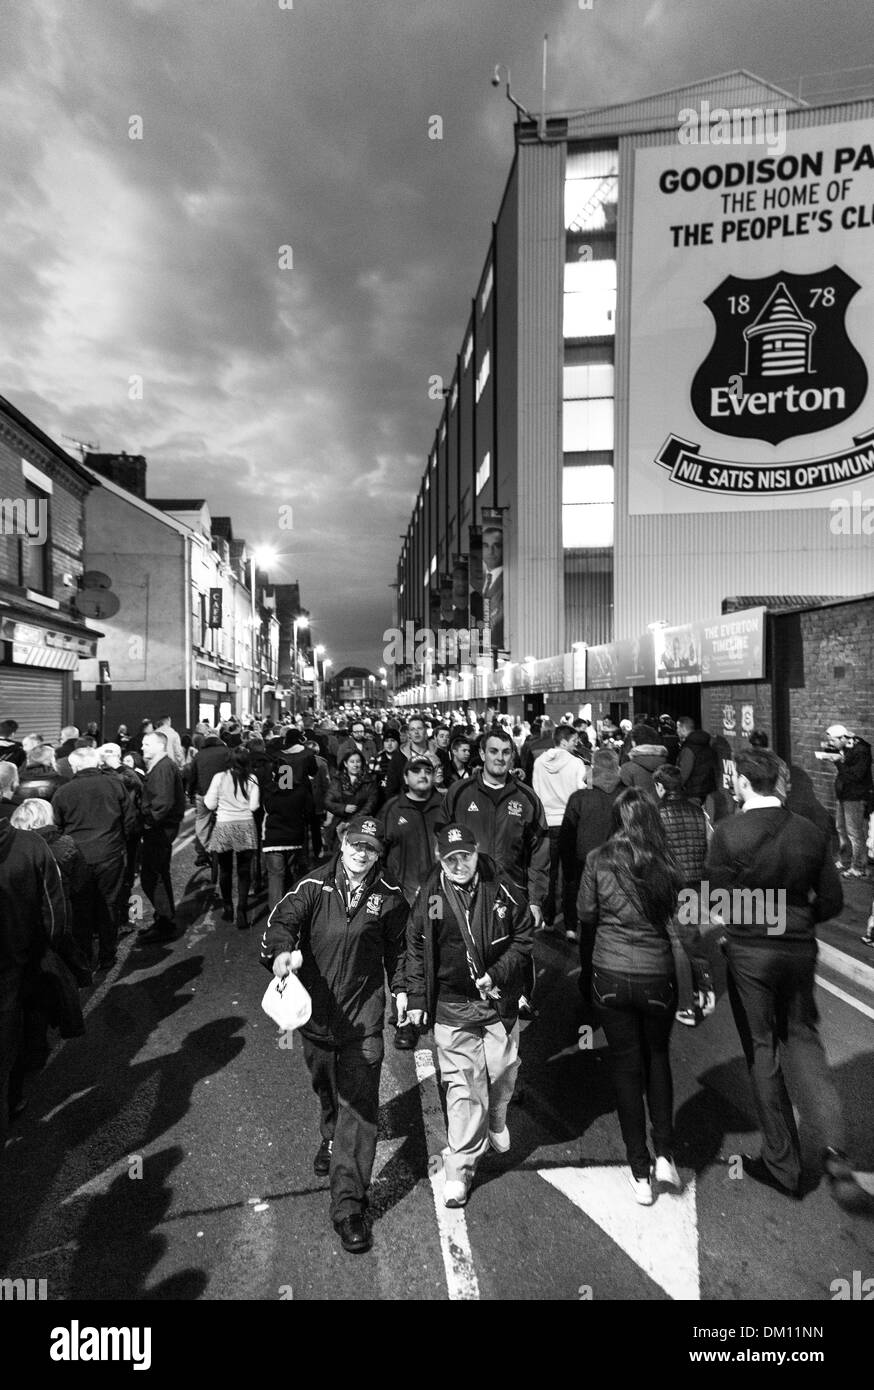 Football fans arriving at Goodison Park before the game between Everton and Newcastle Utd. Liverpool, UK Stock Photo